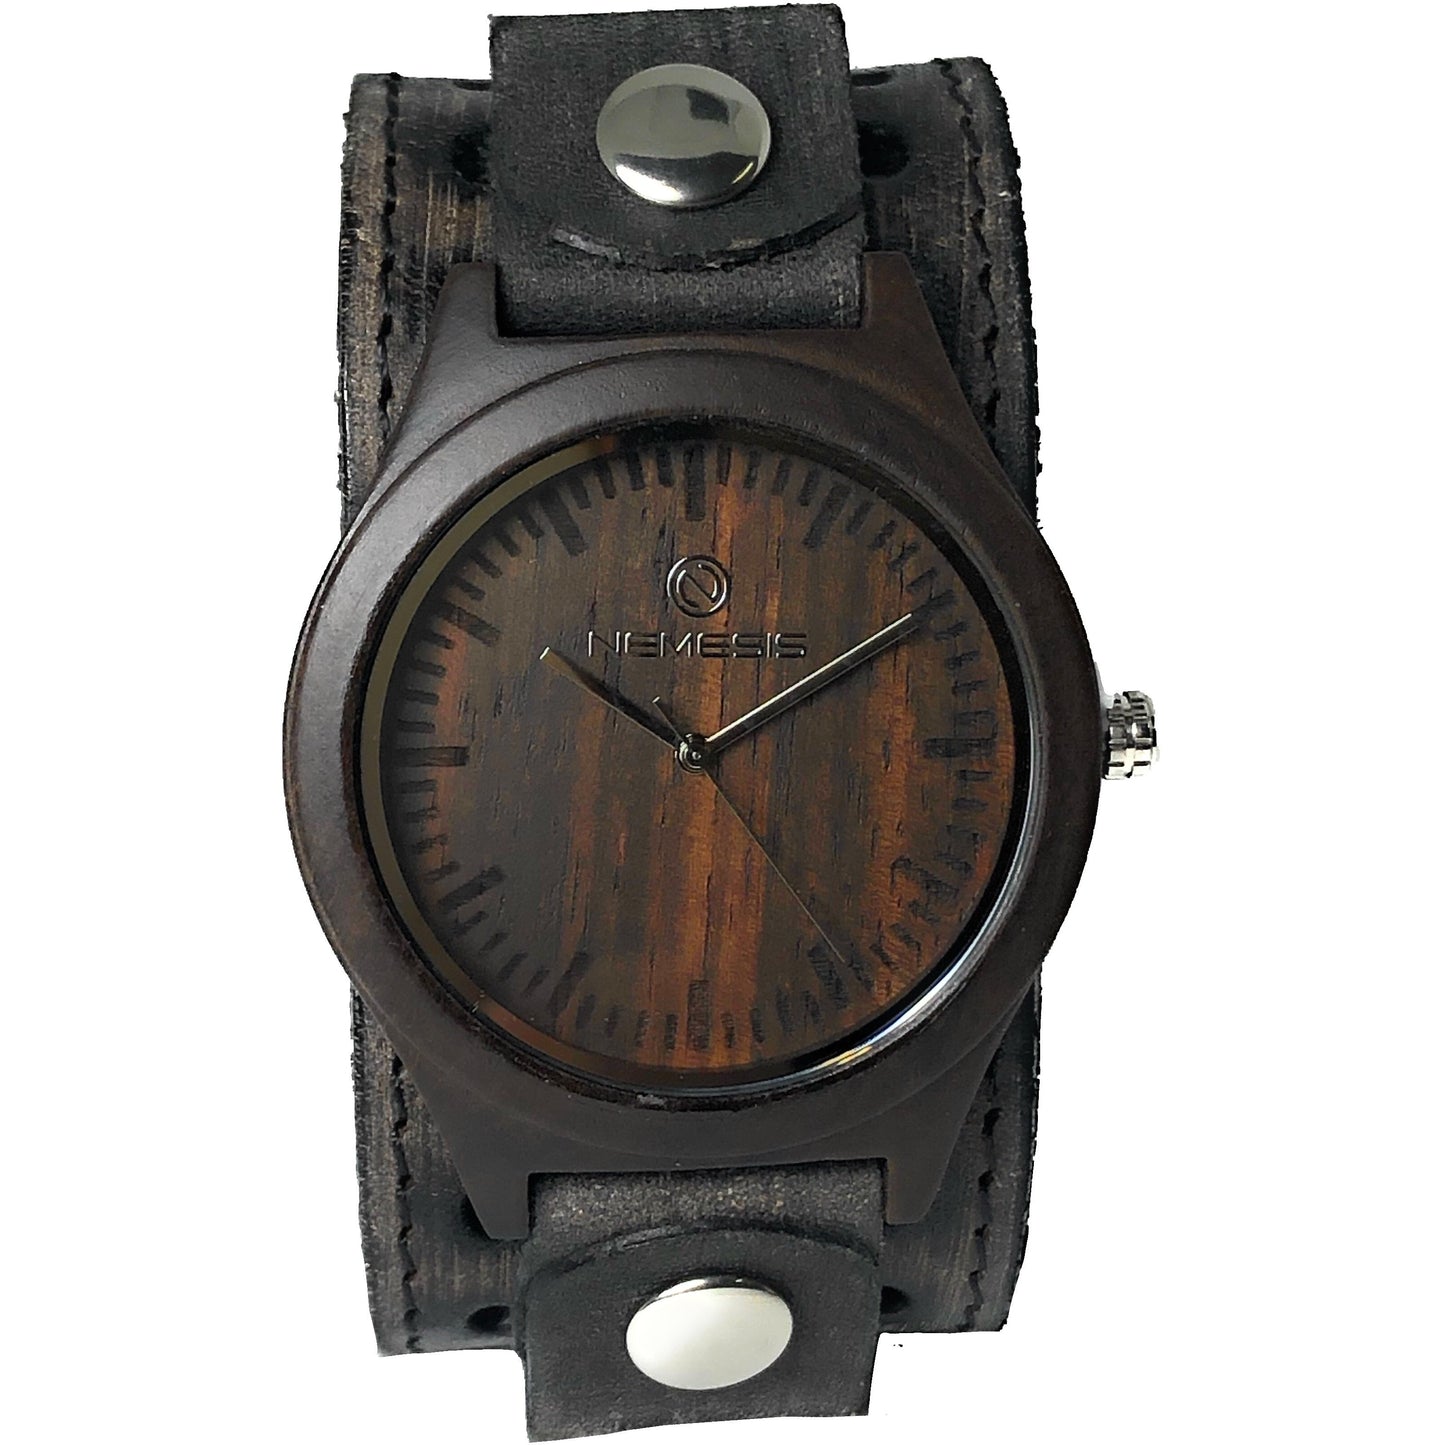 Mahogany Natural Wood Watch with Stitched Distressed Black Leather Cuff VST260K